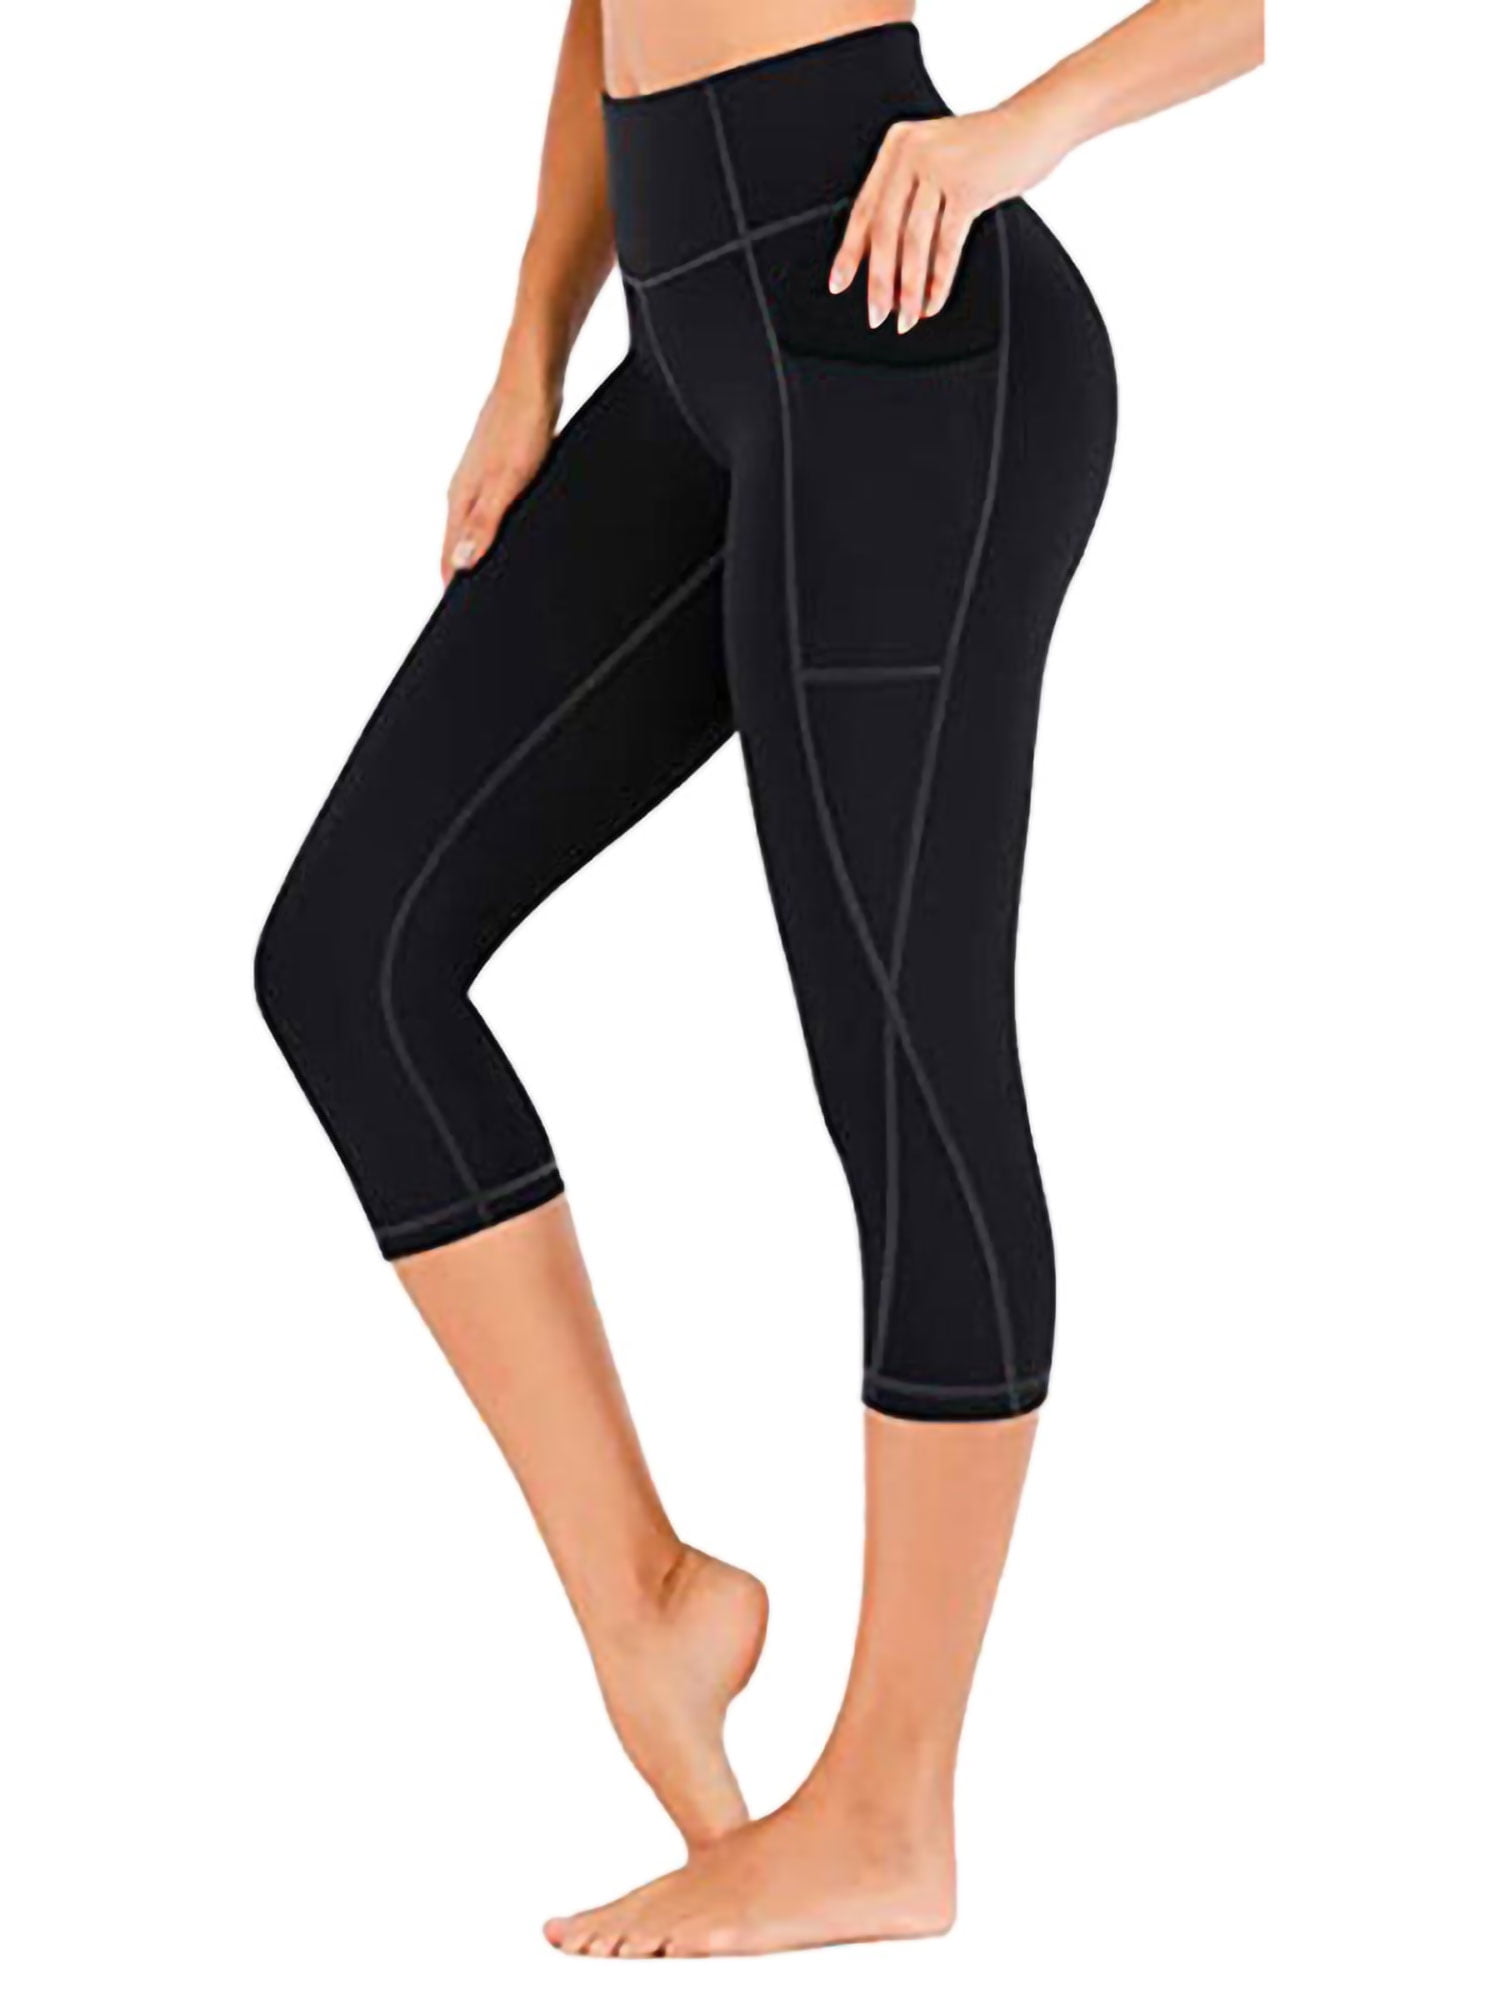 Leggings for Women Hight Waist Tummy Control Capris Seamless Sports Tight Elastic Quick Dry Solid Color Yoga Running Workout Gym Pants with Pocket